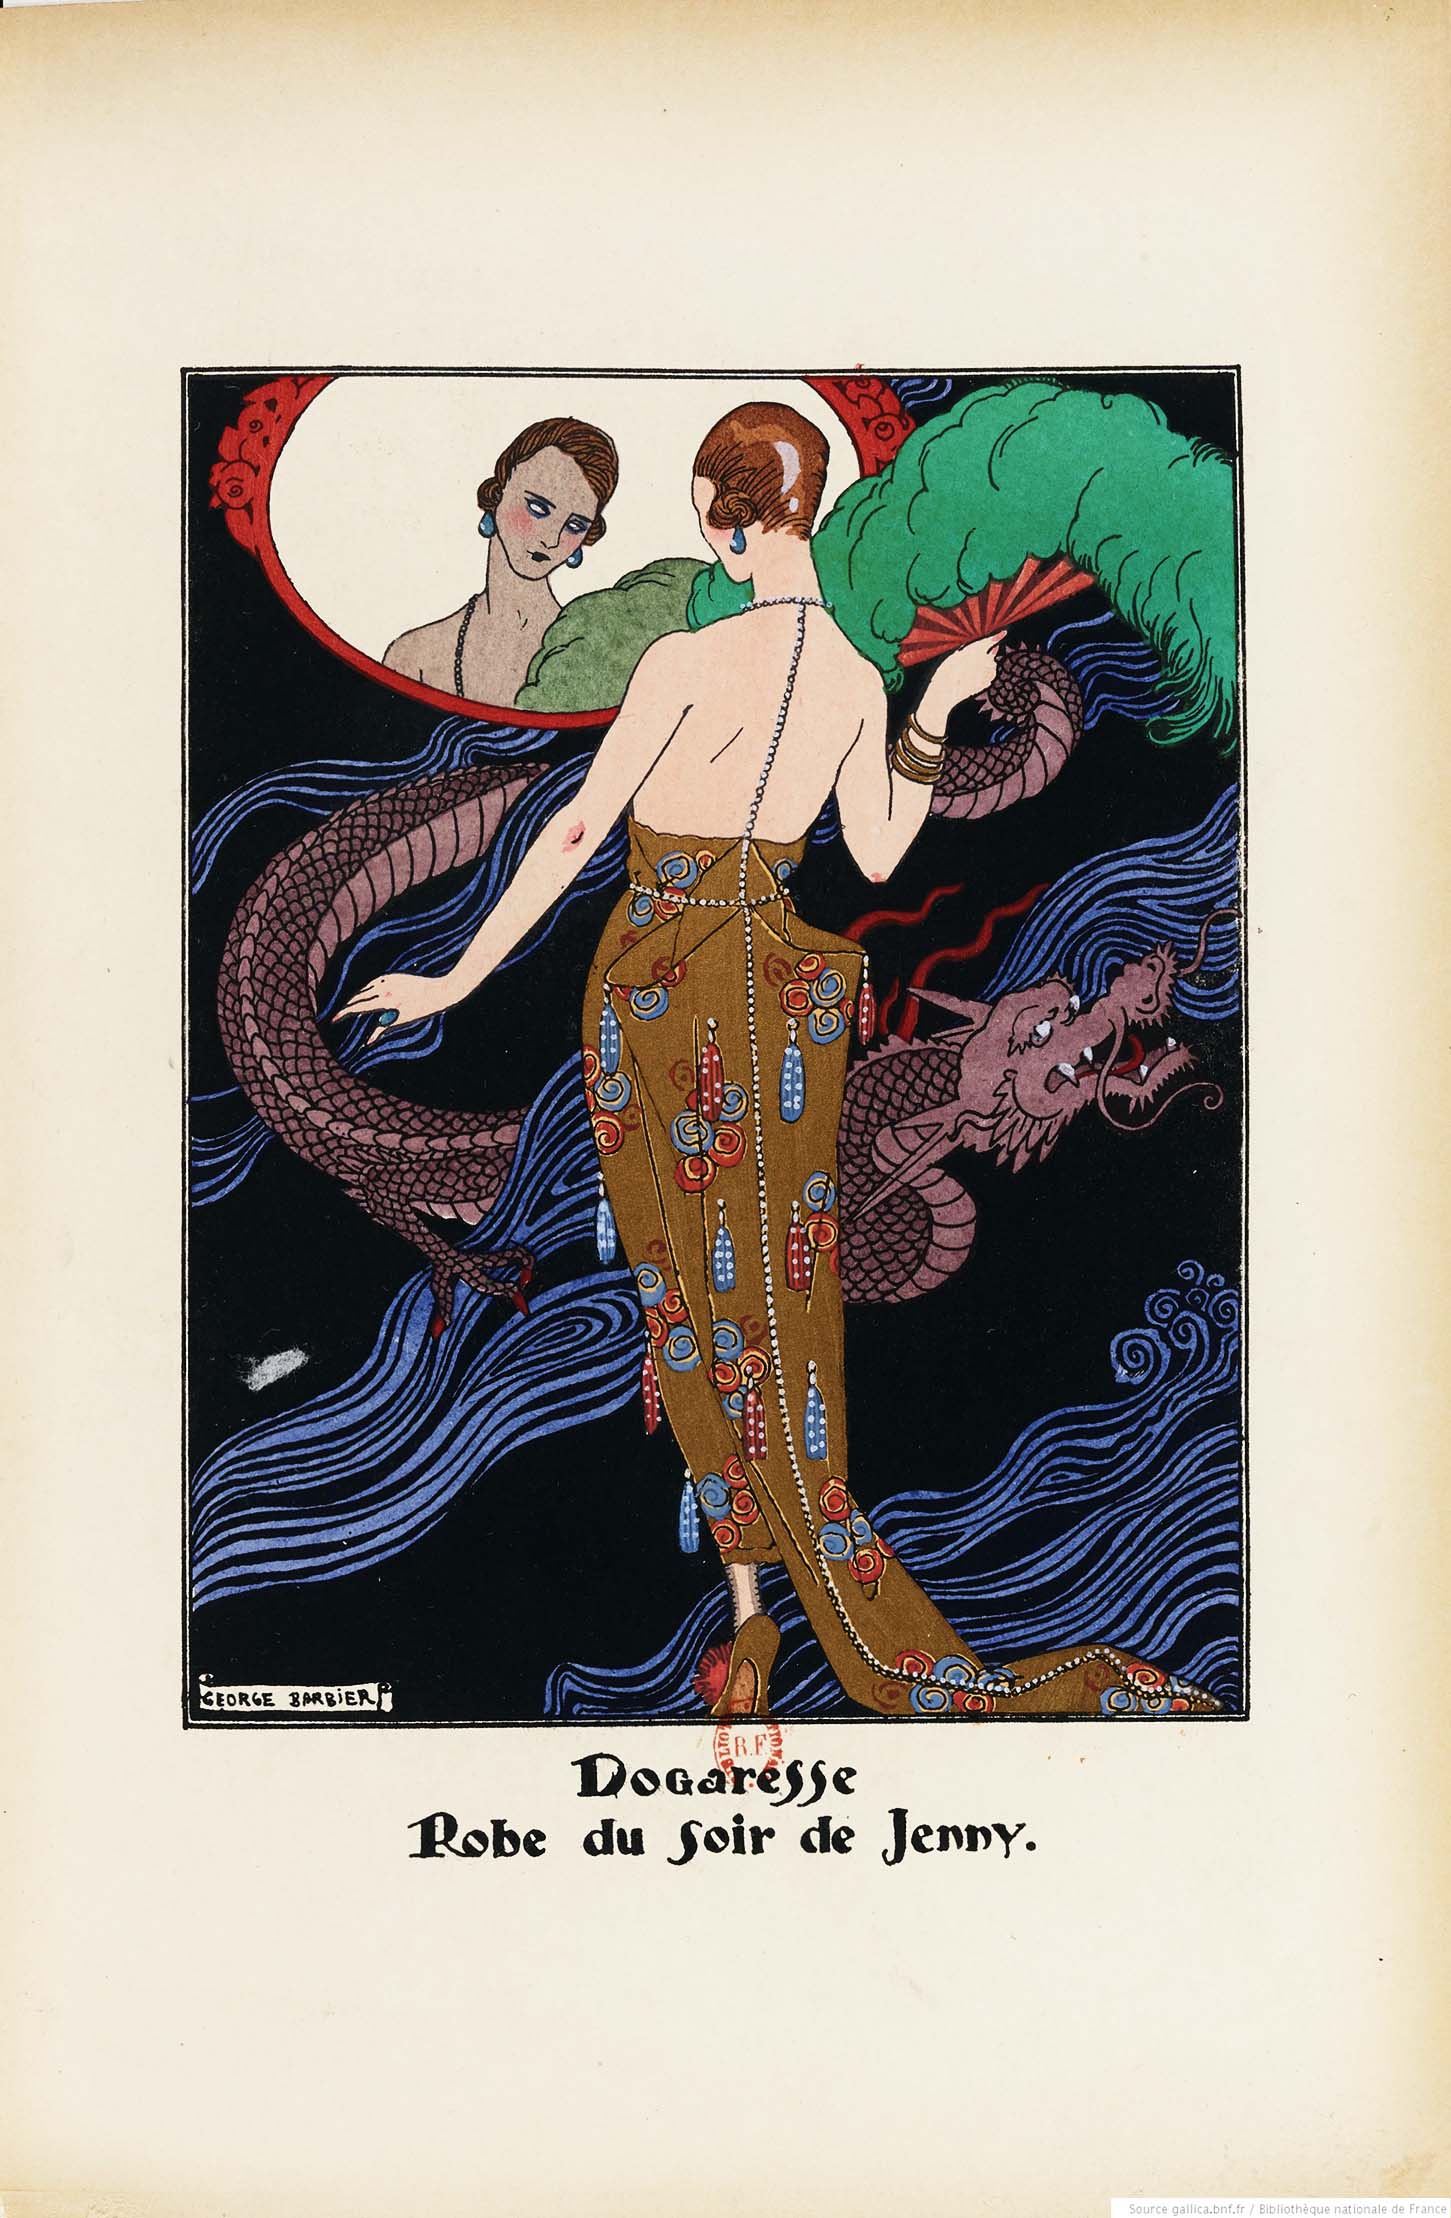 The original Dogaresse by George Barbier